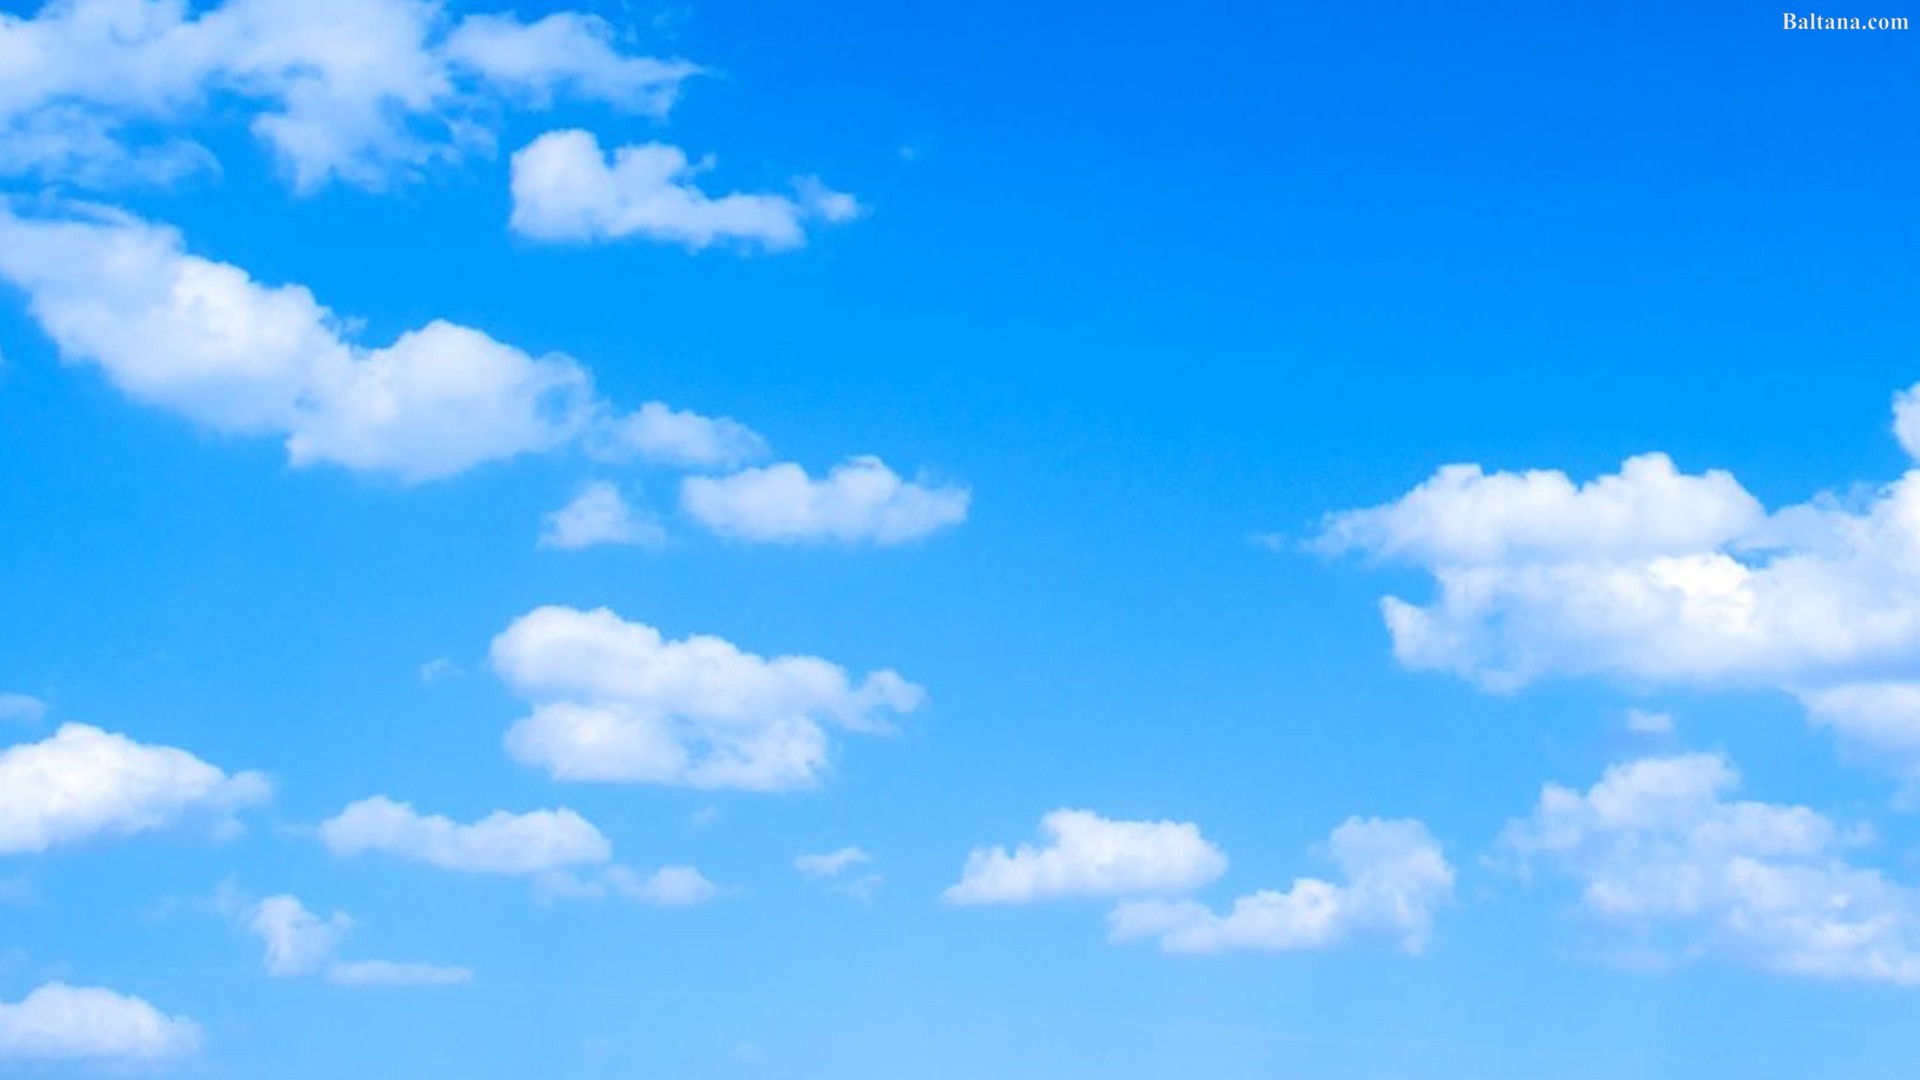 29 Blue Sky With Clouds Wallpapers On Wallpapersafari